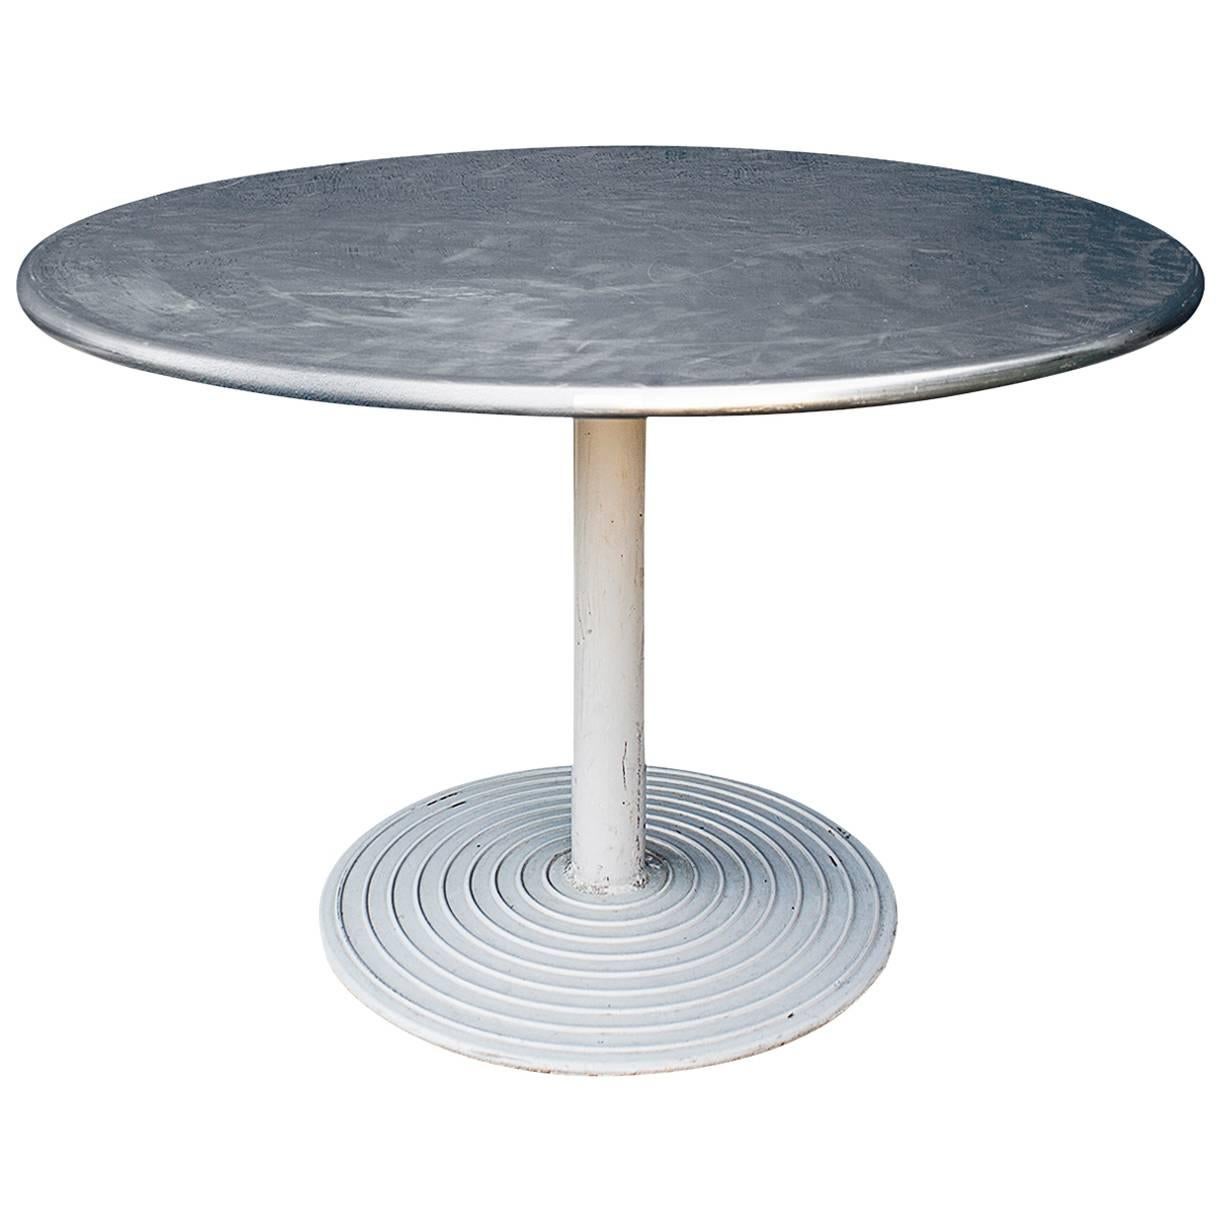 Round Stainless Cafe Table on Cast Aluminum Base, circa 1960s